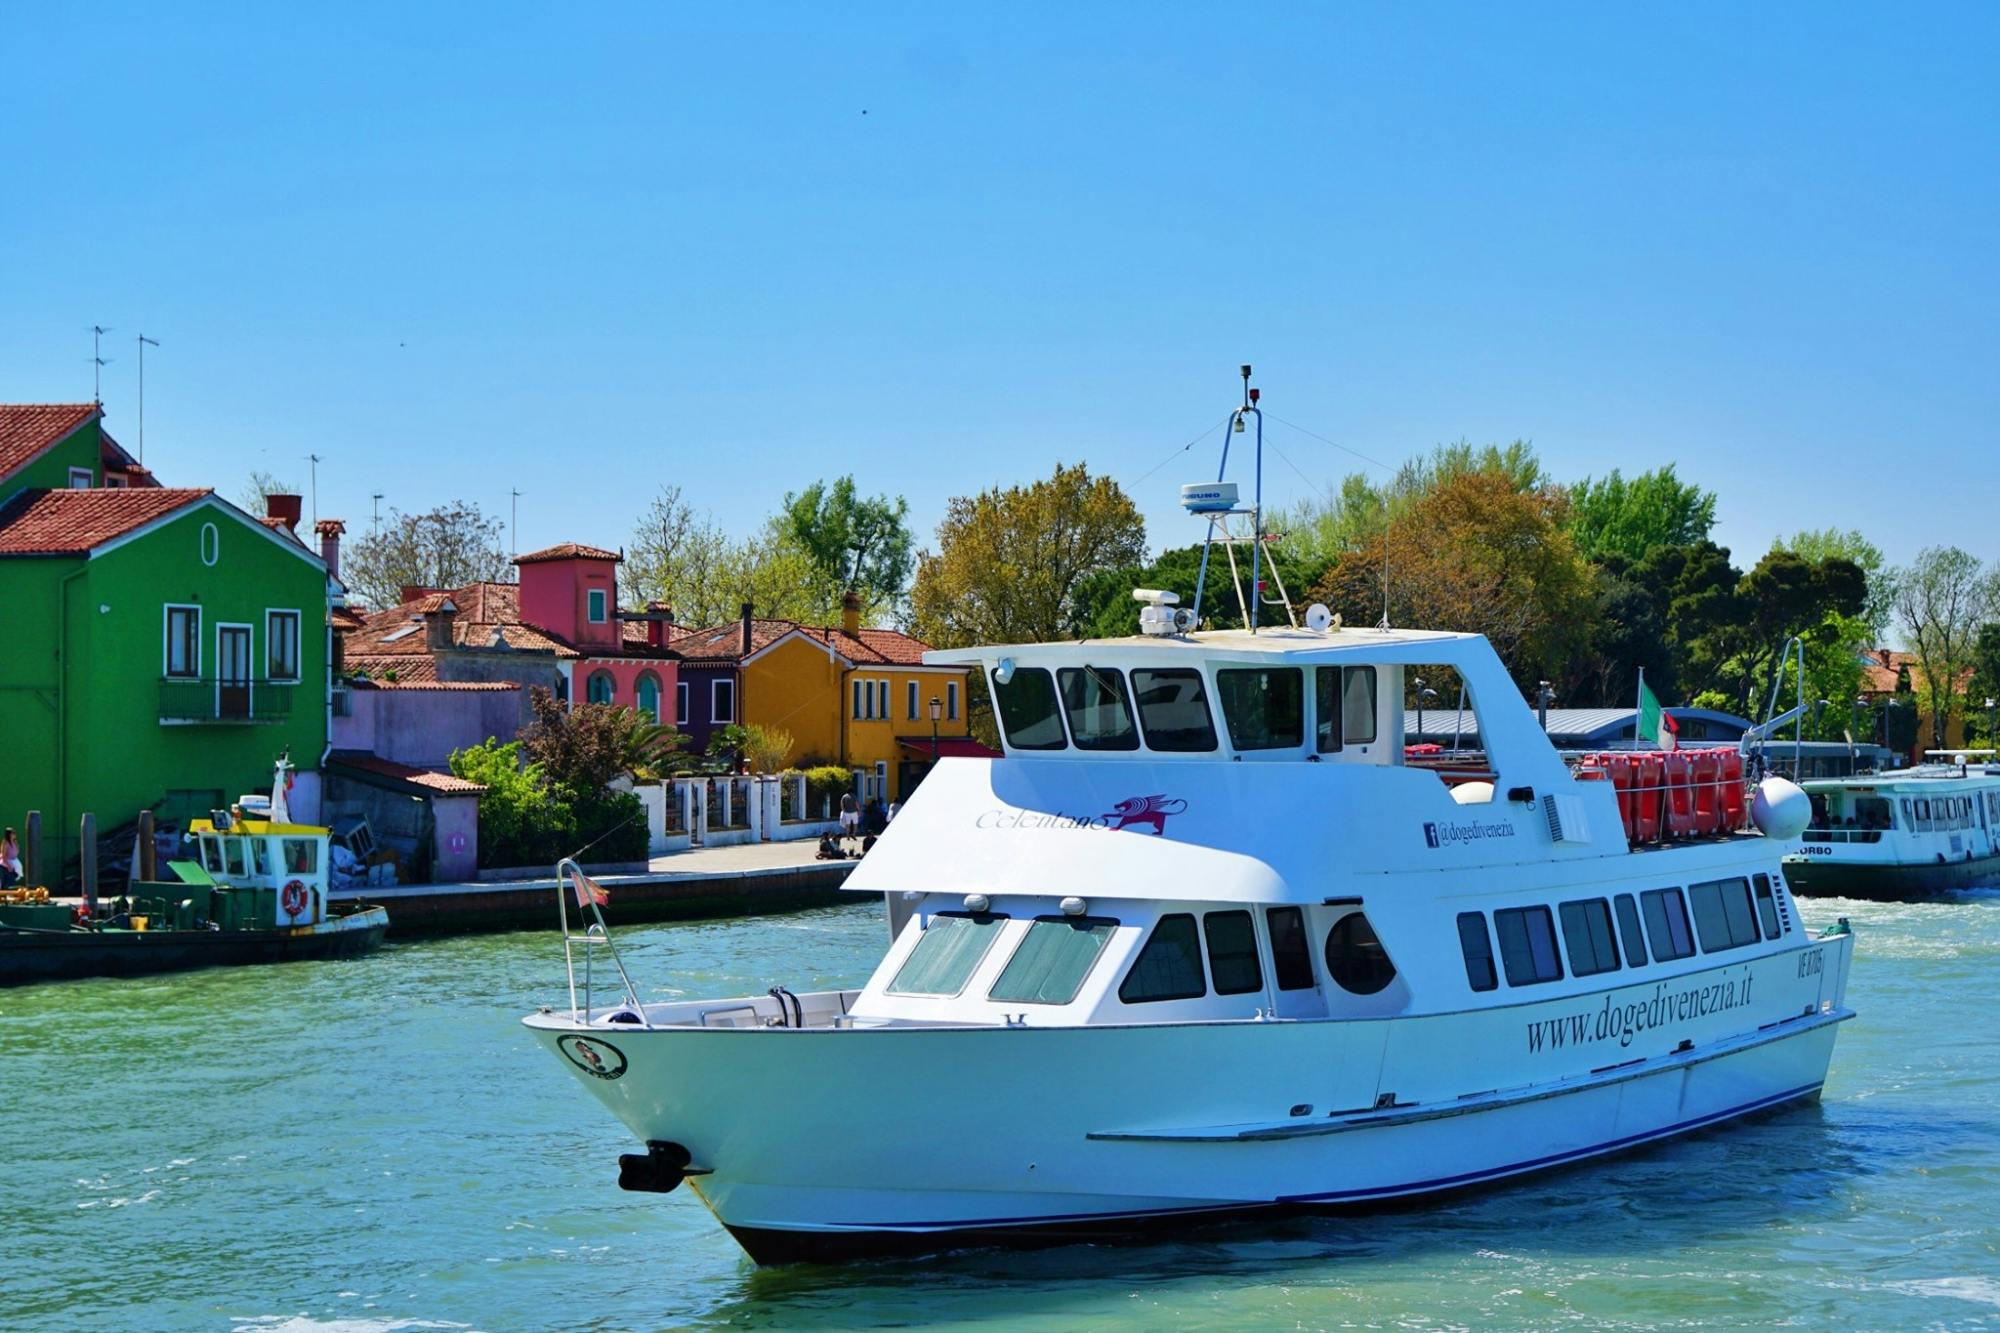 Murano, Burano and Torcello day tour from Punta Sabbioni